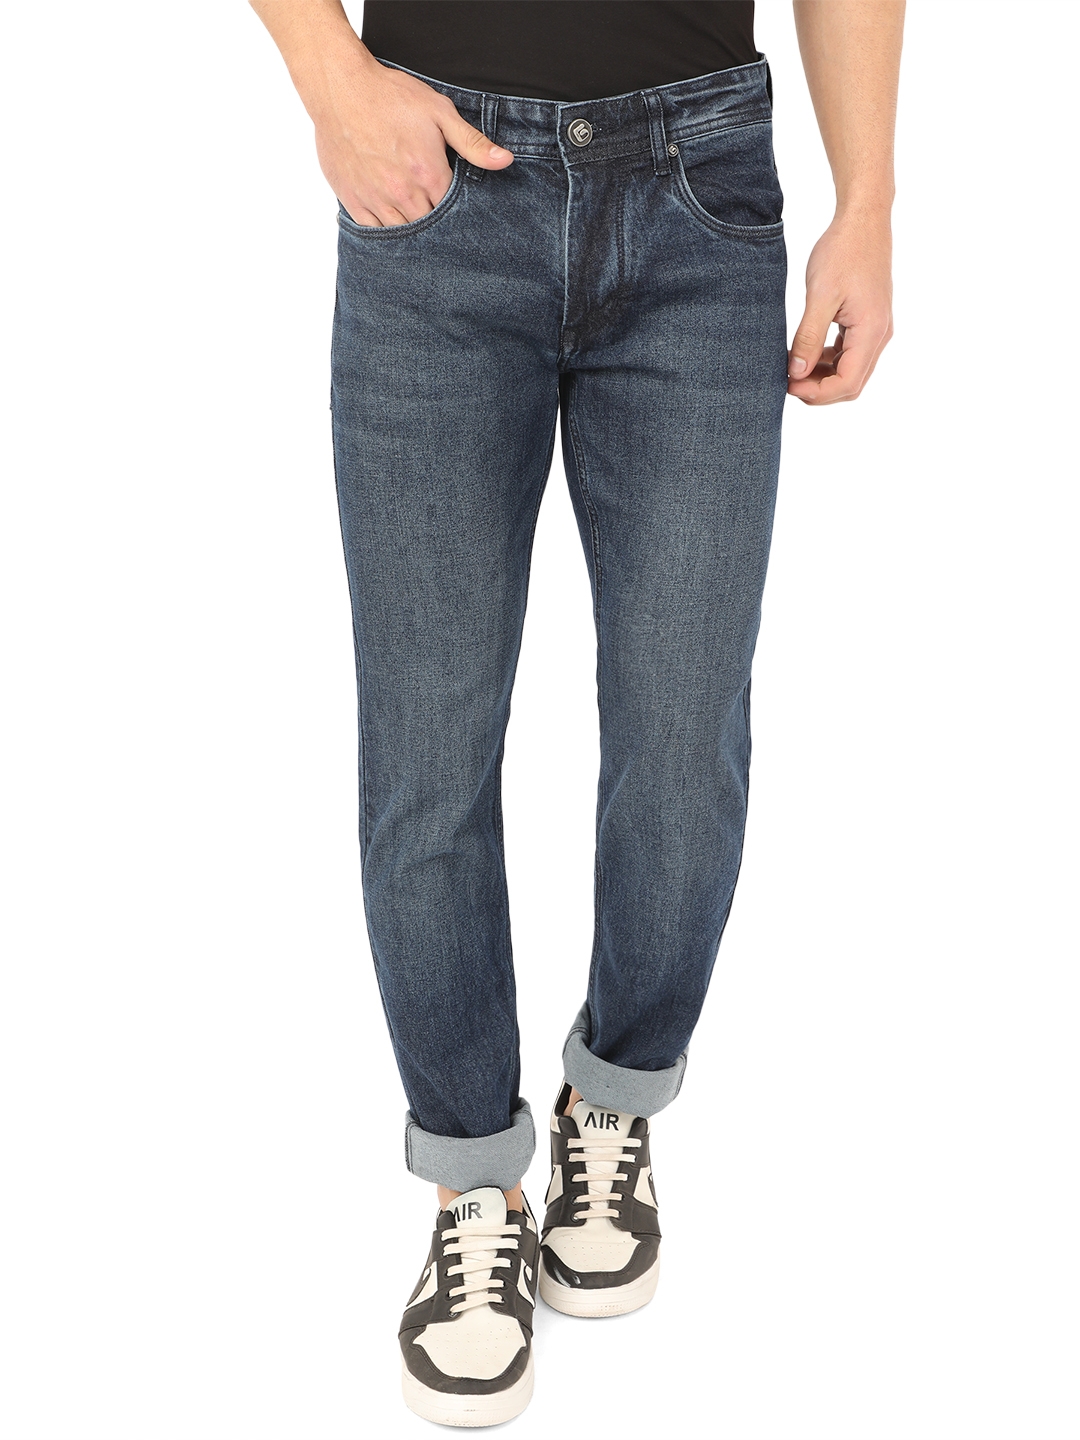 Greenfibre | Denim Blue Washed Narrow Fit Jeans | Greenfibre 0